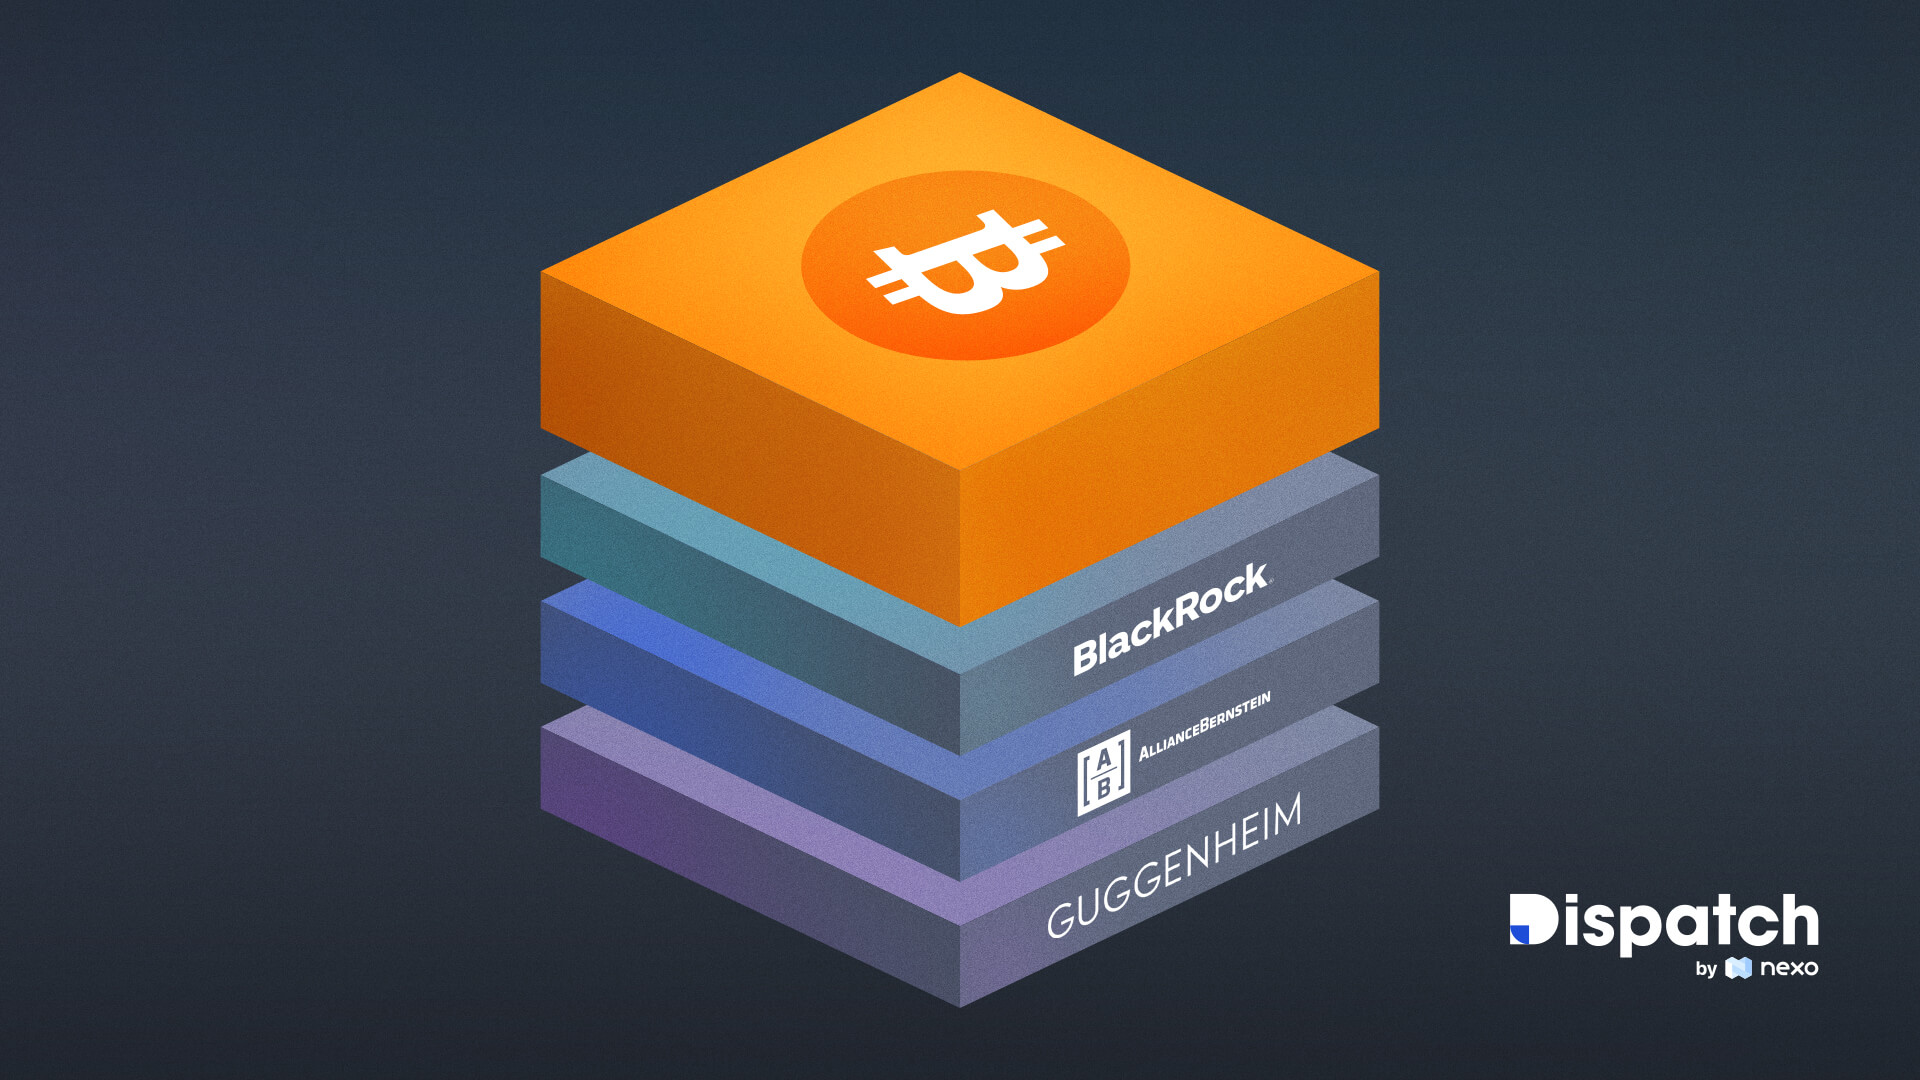 Dispatch #13: Guggenheim, BlackRock, and Other Institutions Propel Bitcoin to New ATH